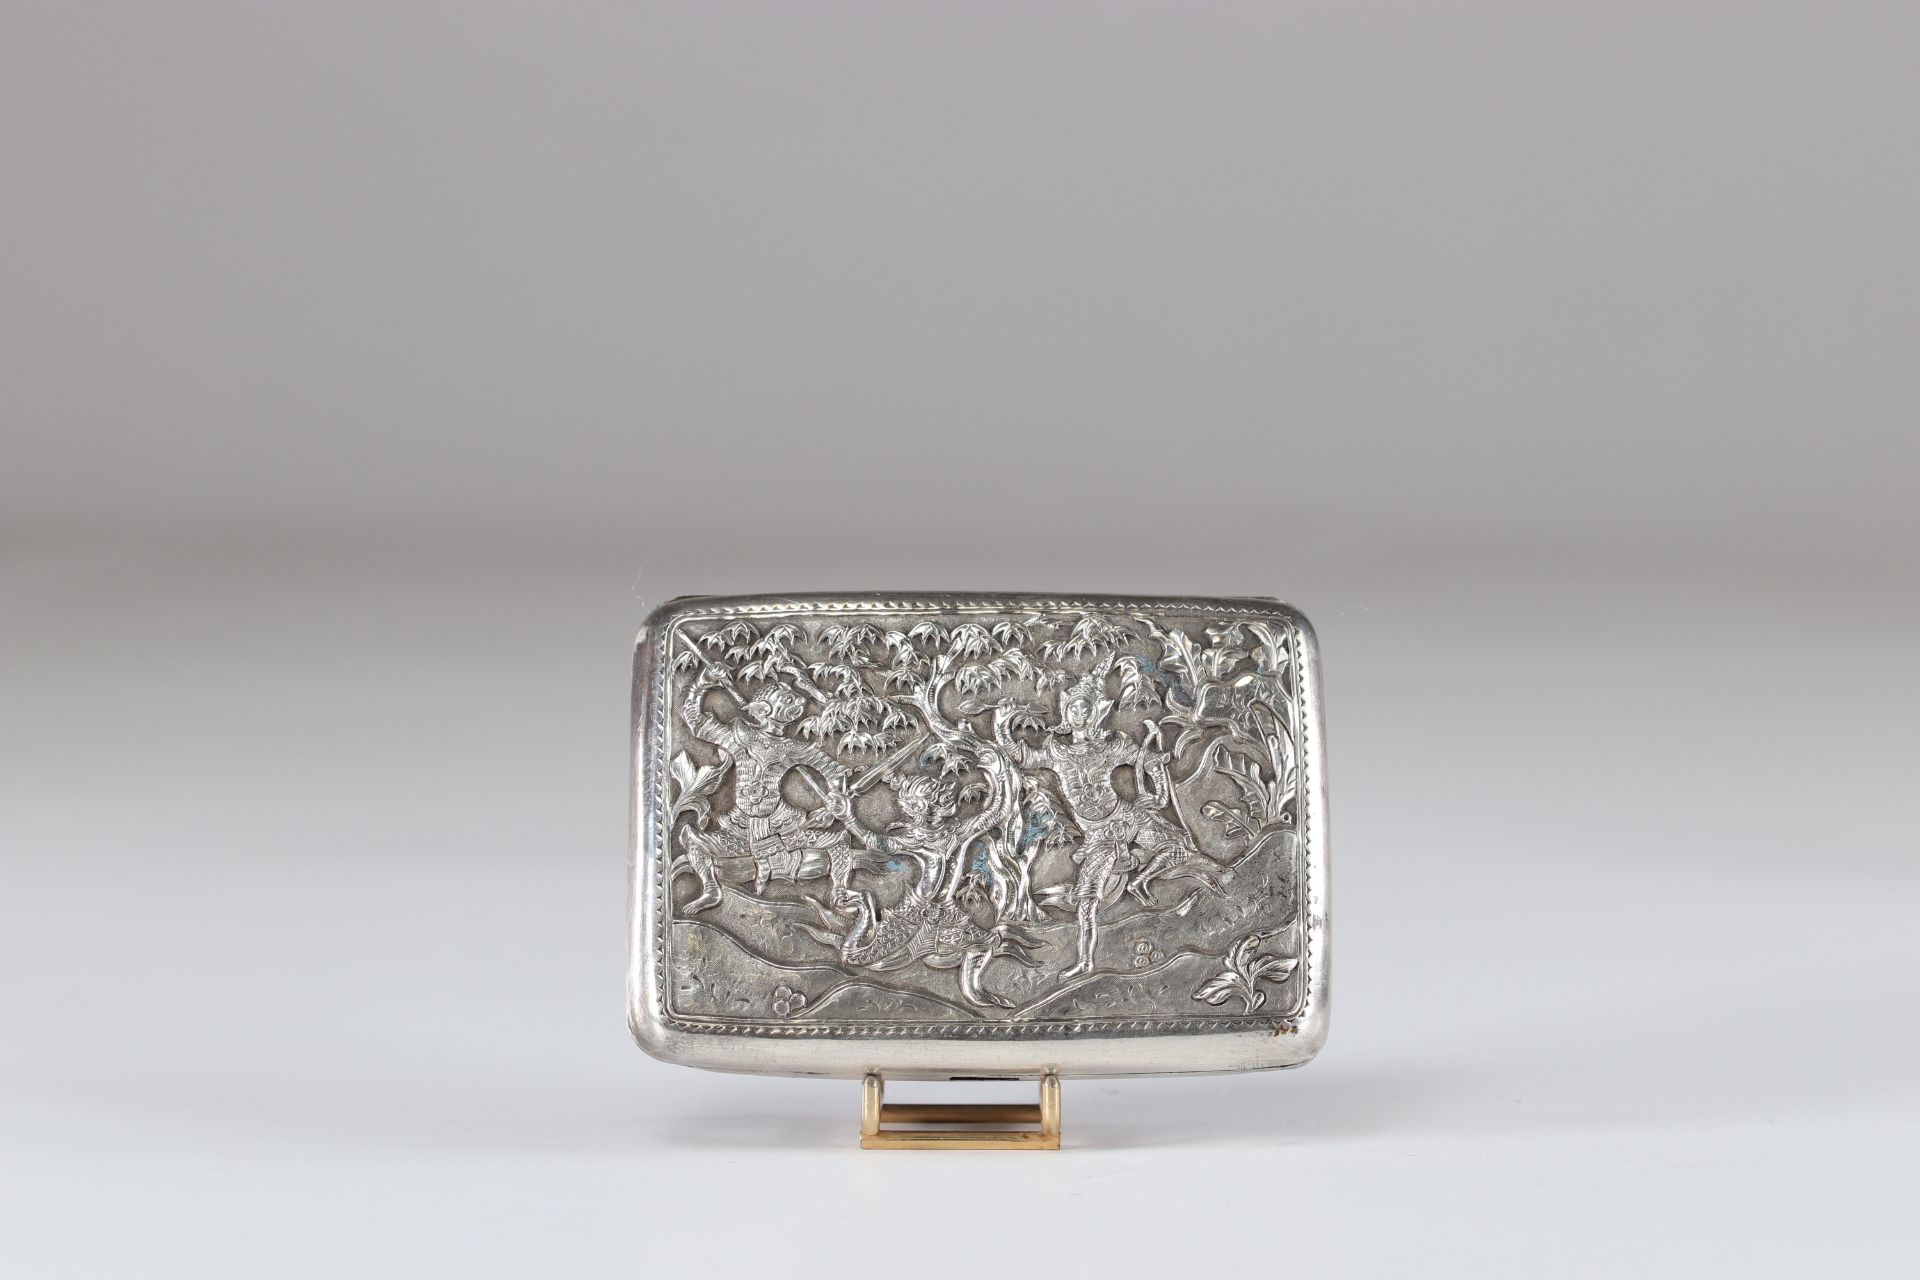 Thailand silver box early 20th century